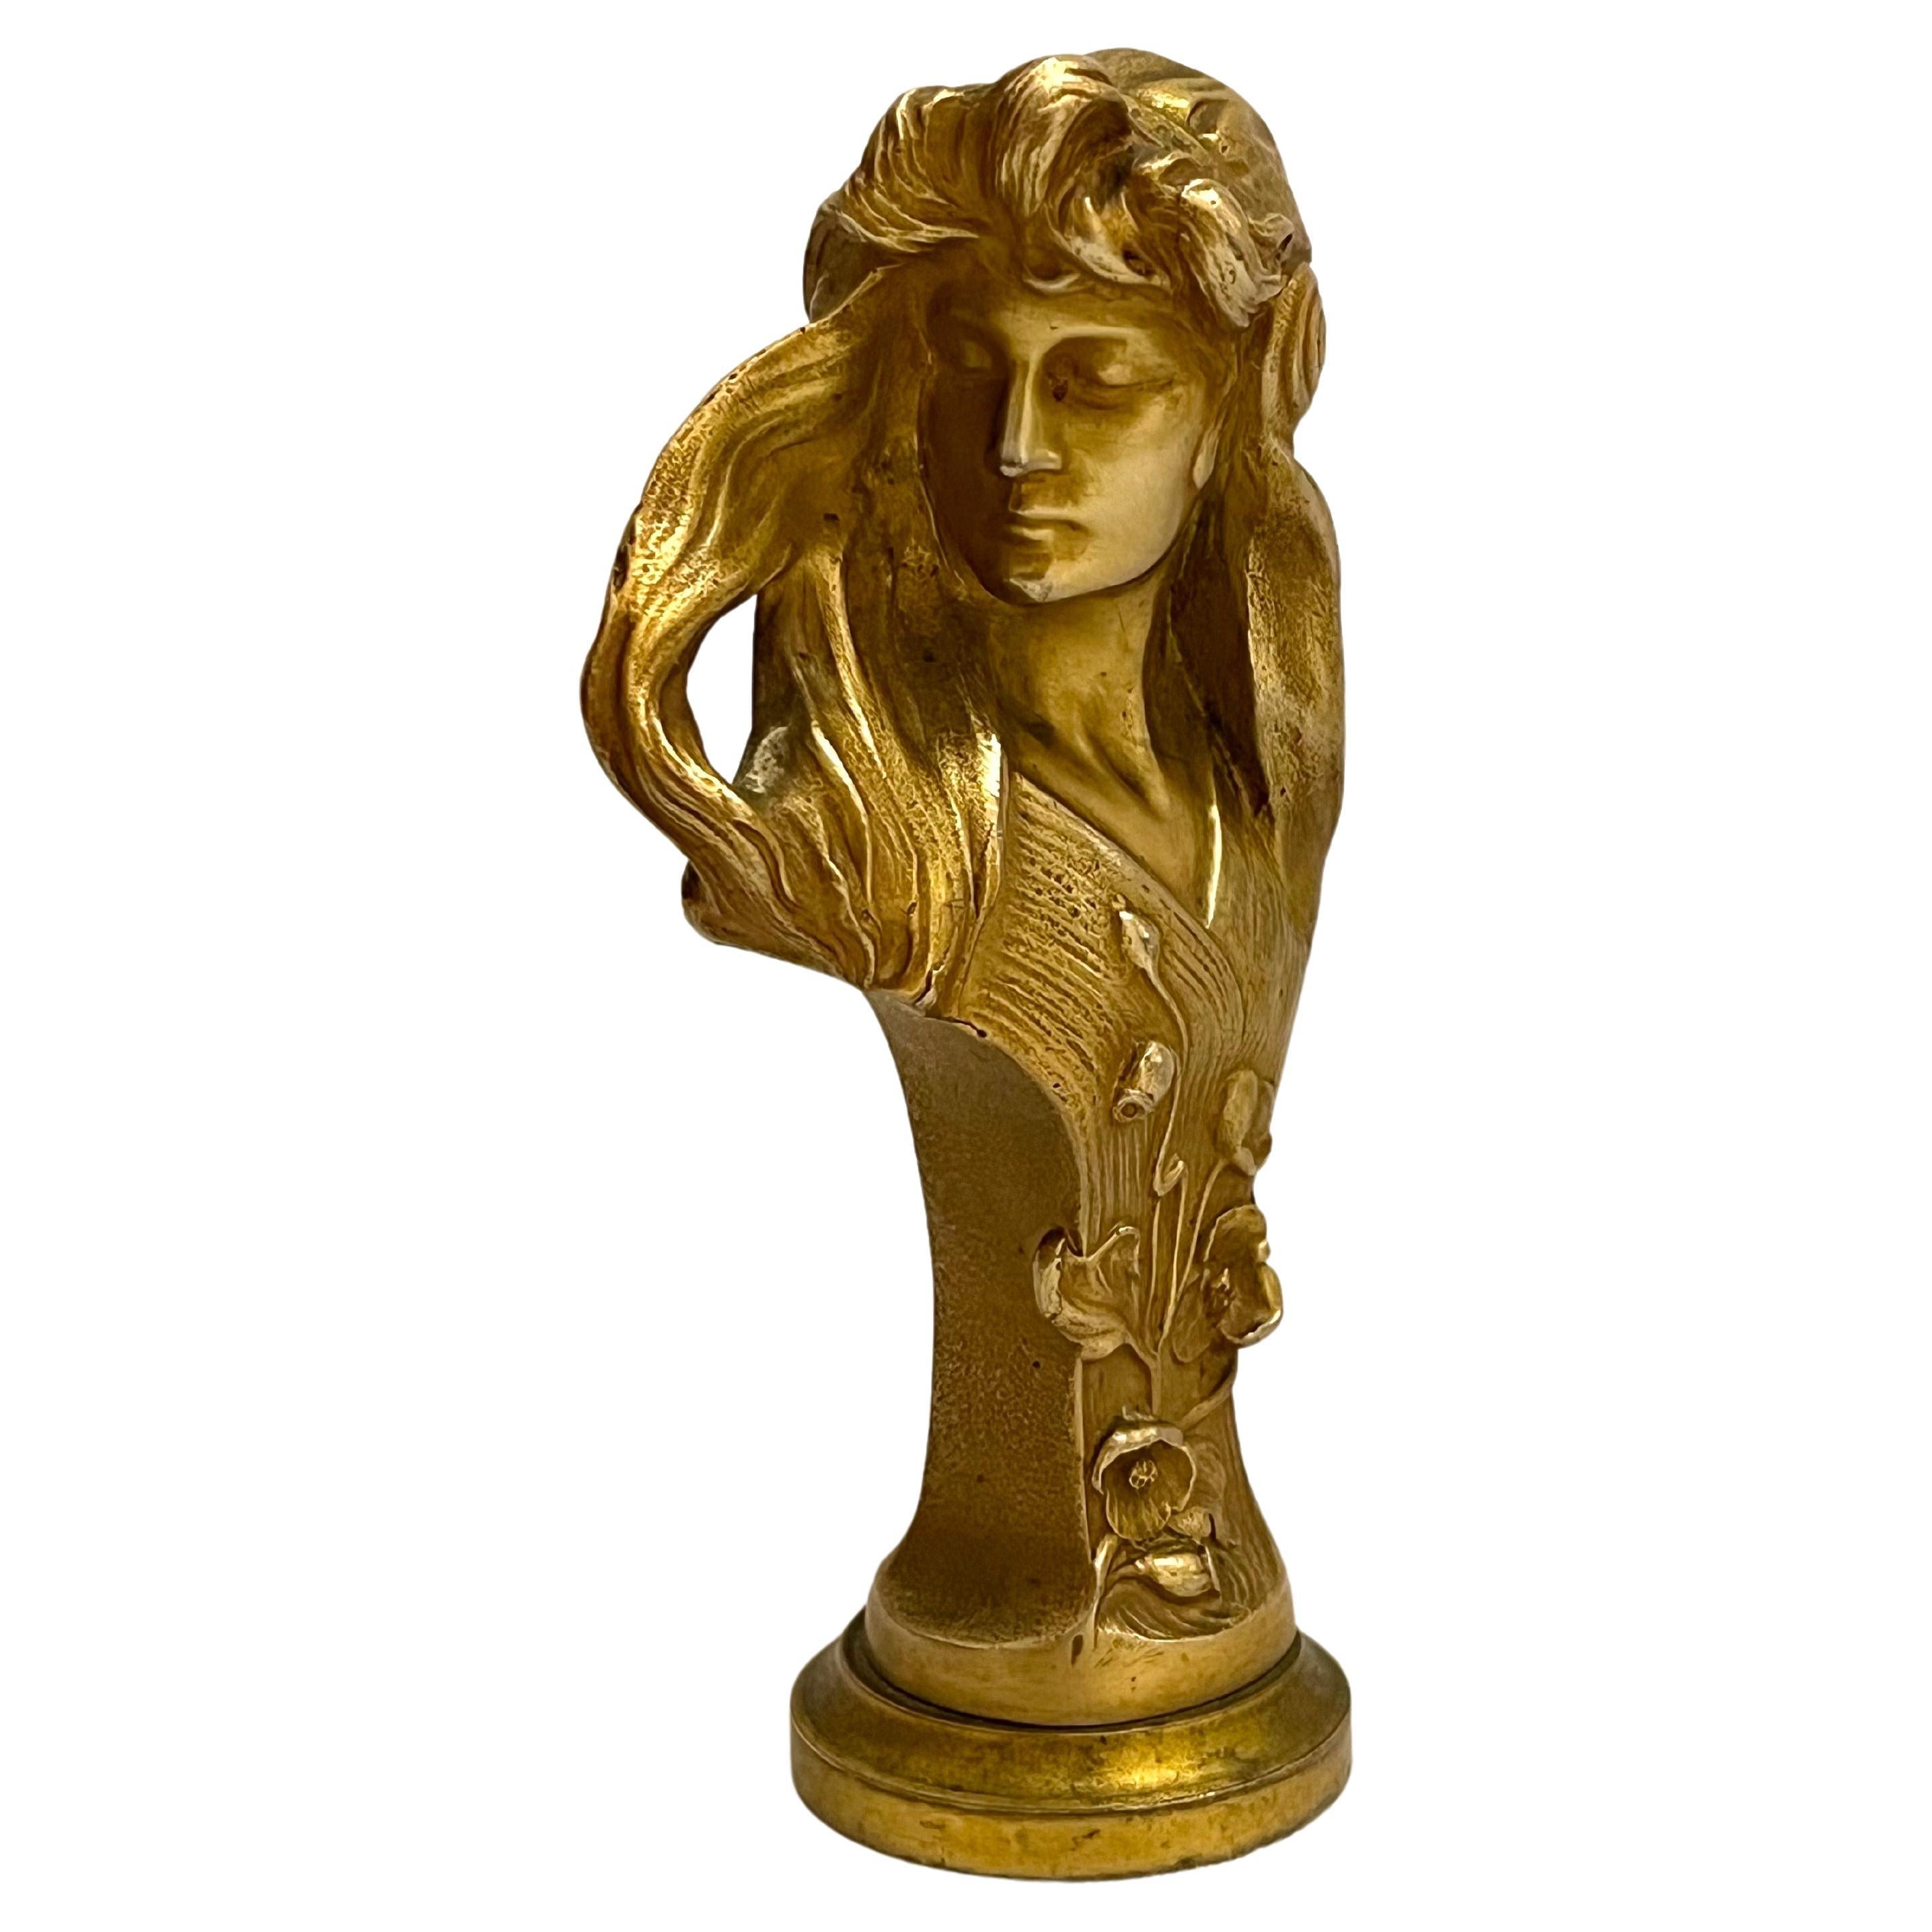 A beautifully detailed gilt bronze bust of a young woman by Austrian artist Hans Muller. This work is signed on the back, H Muller. The long flowing hair of the model creates a sense of movement around her delicate face and decollete. There are